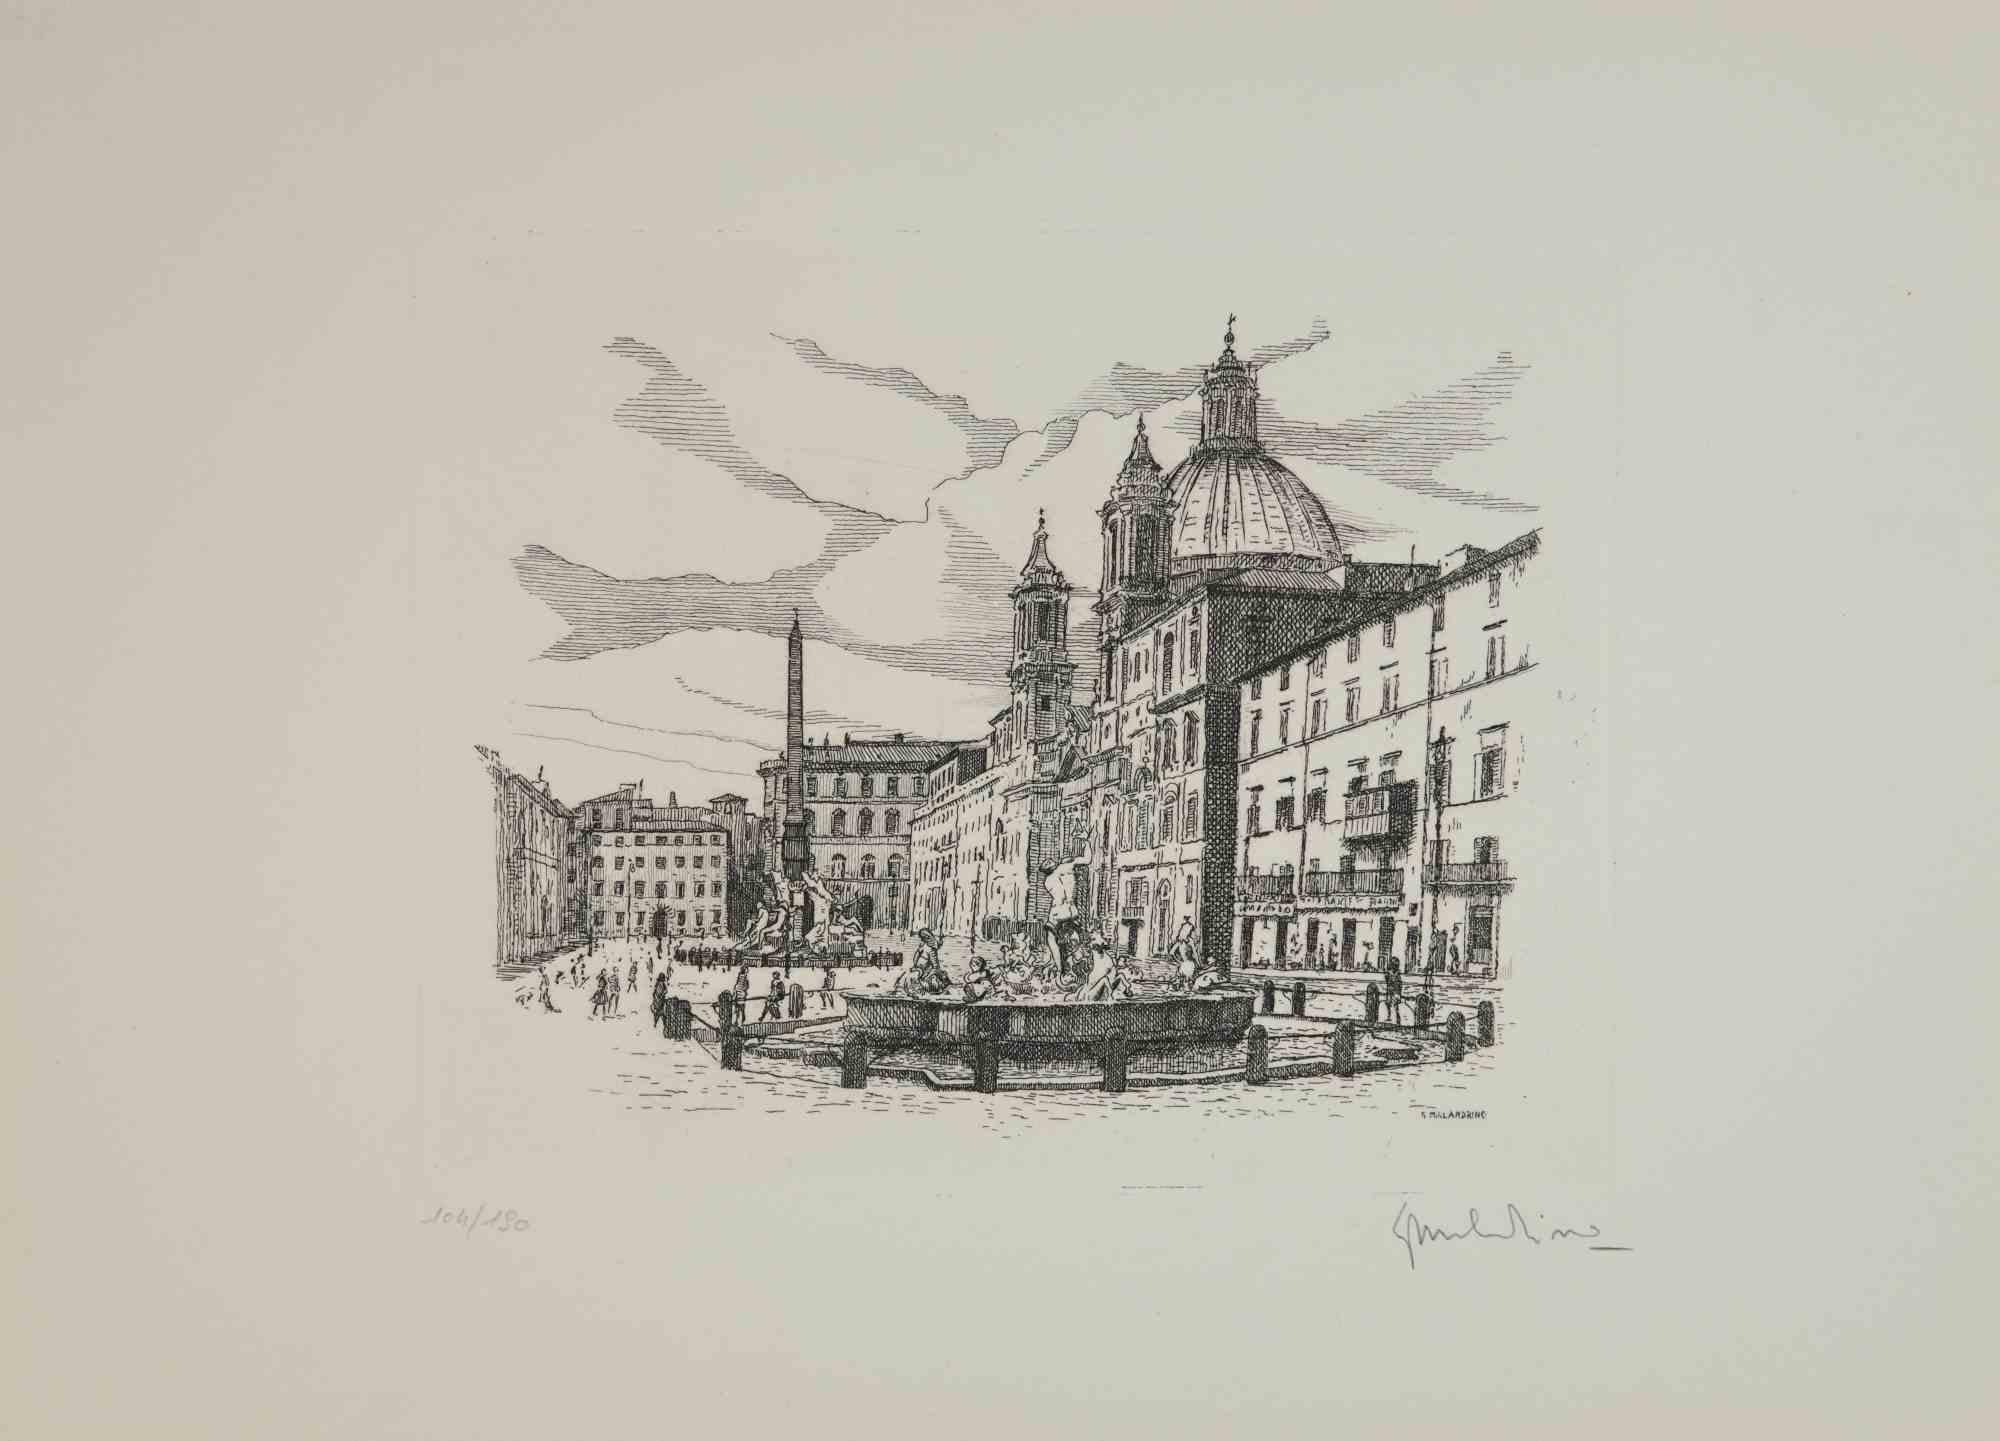 Piazza Navona is an artwork realized by Giuseppe Malandrino.

Print in etching technique.

Hand-signed by the artist in pencil on the lower right corner.

Numbered edition104/190 .

Good condition. 

This artwork represents the beautiful Roman